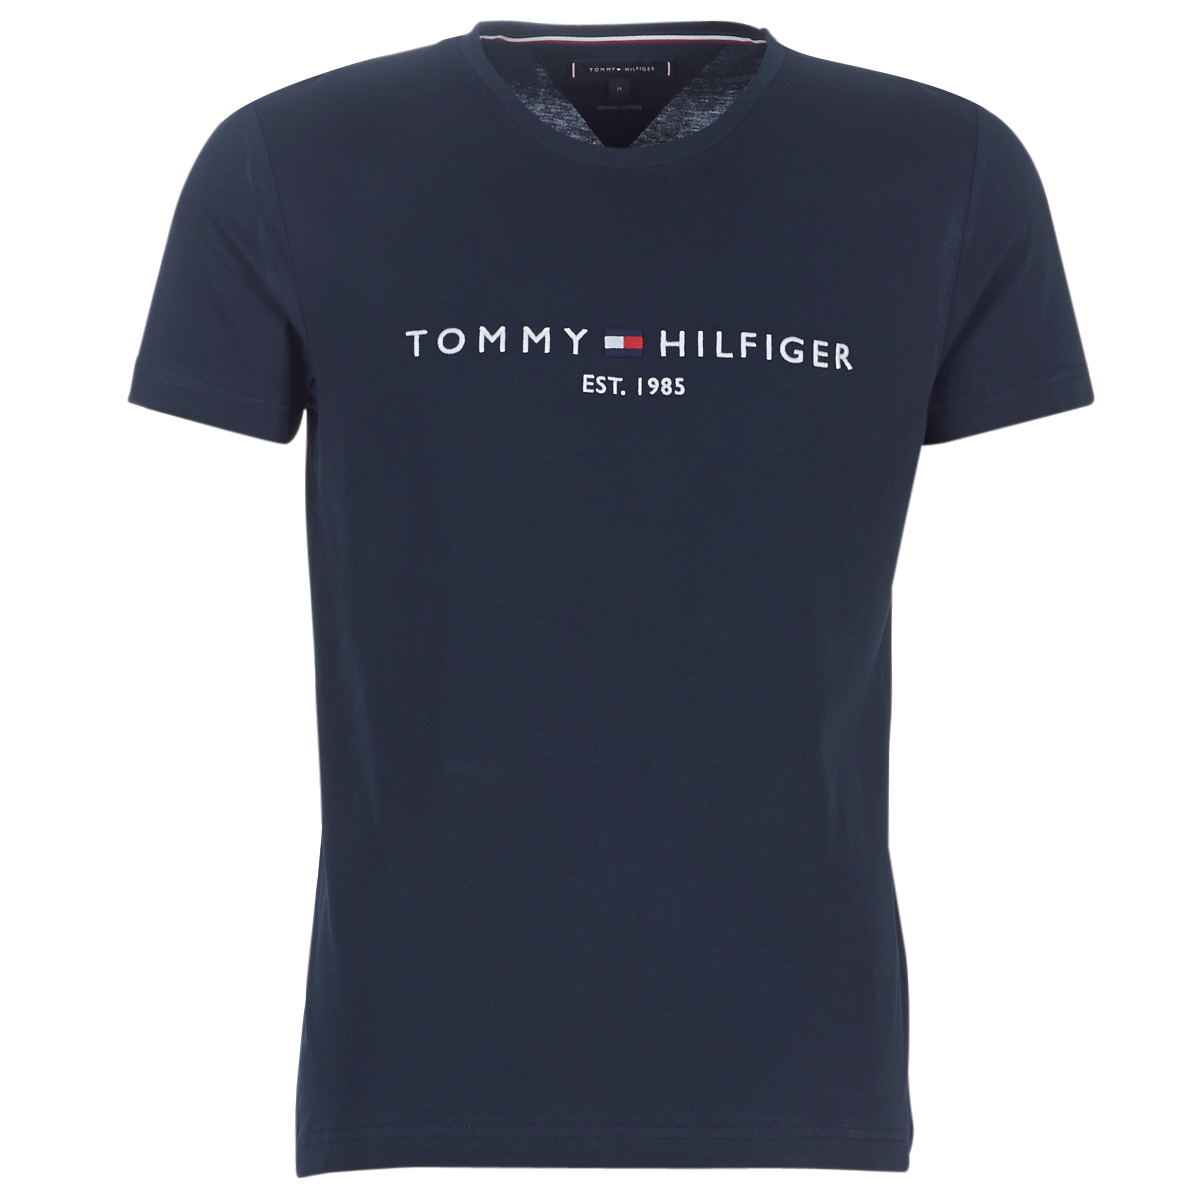 Tommy Hilfiger TOMMY FLAG HILFIGER TEE Marine Fast delivery Spartoo  Europe Clothing short-sleeved t-shirts Men 55,00 €